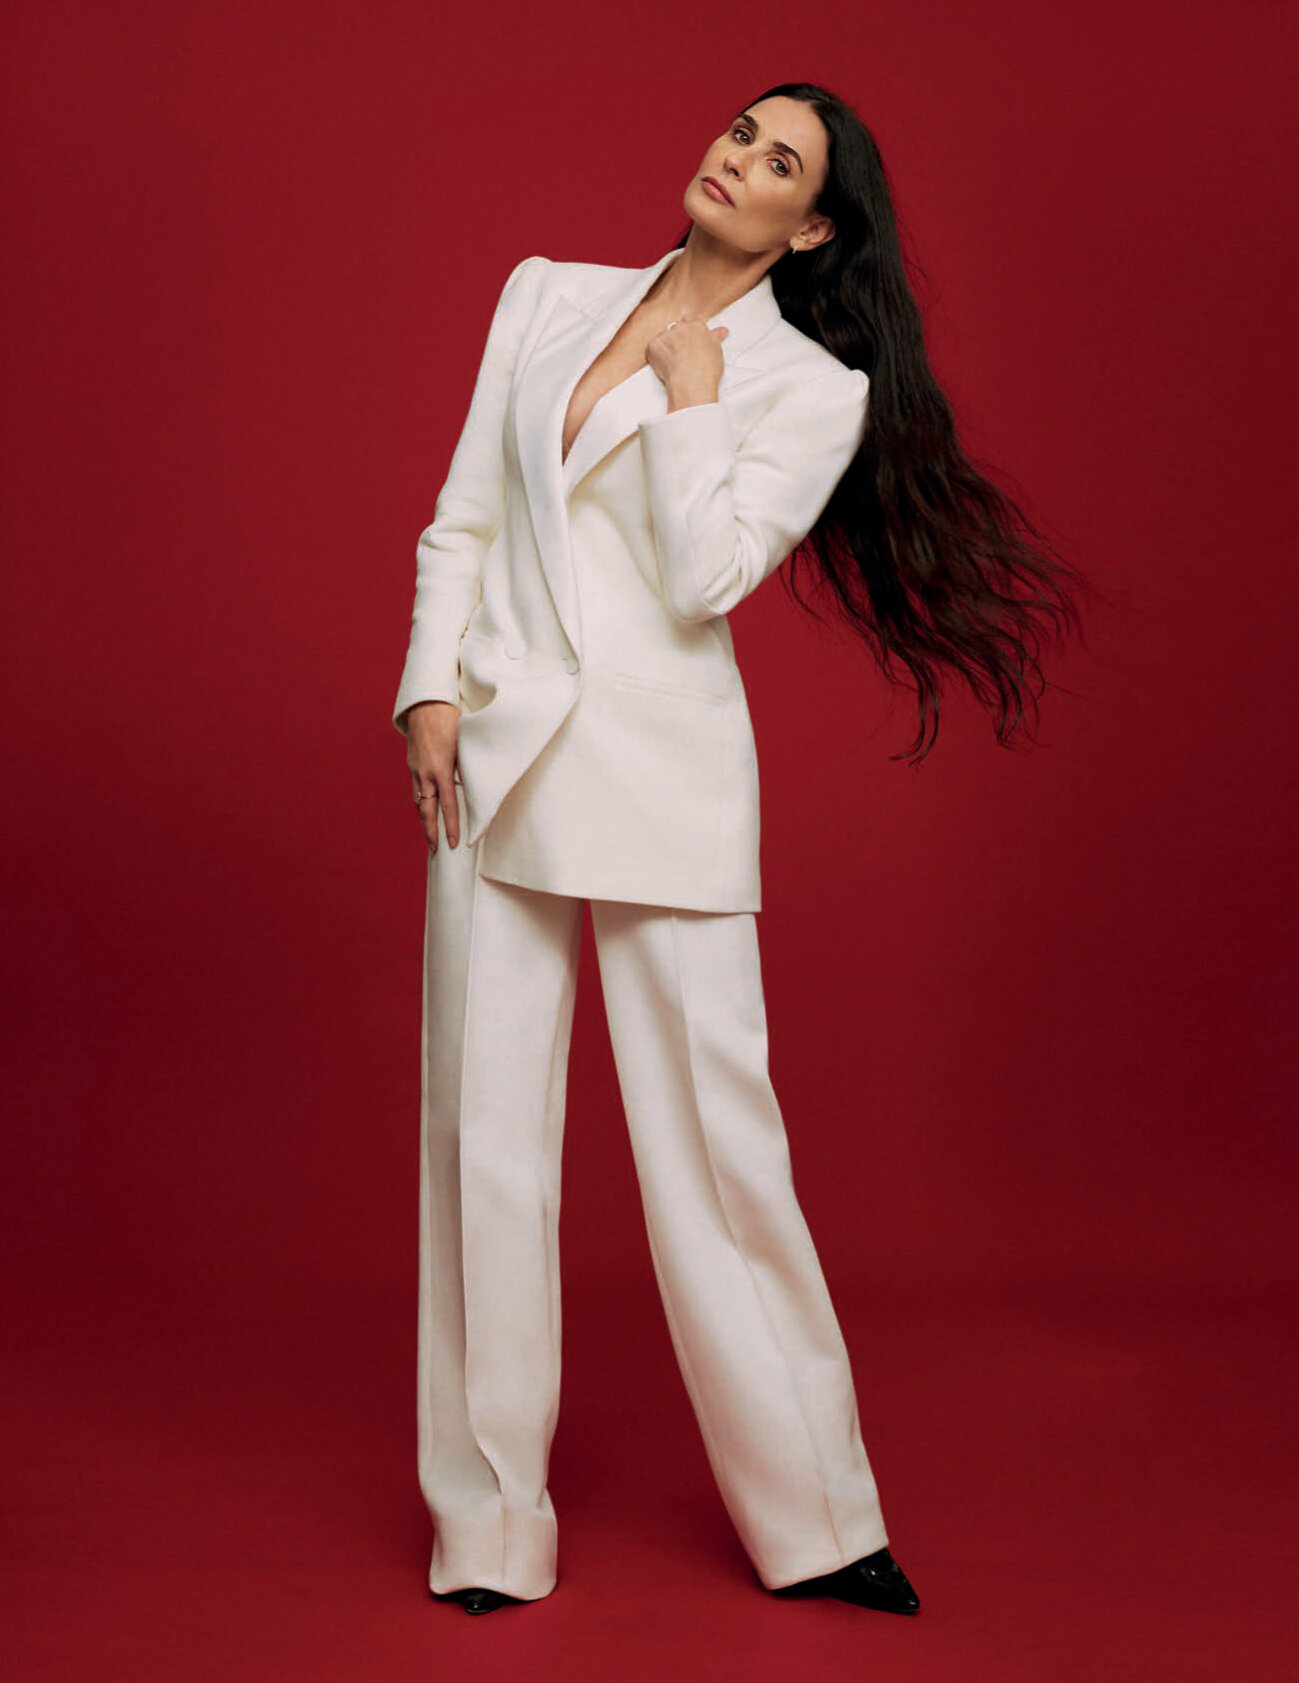 Demi Moore by Thomas Whiteside for Vogue Spain May 2020 (3).jpg